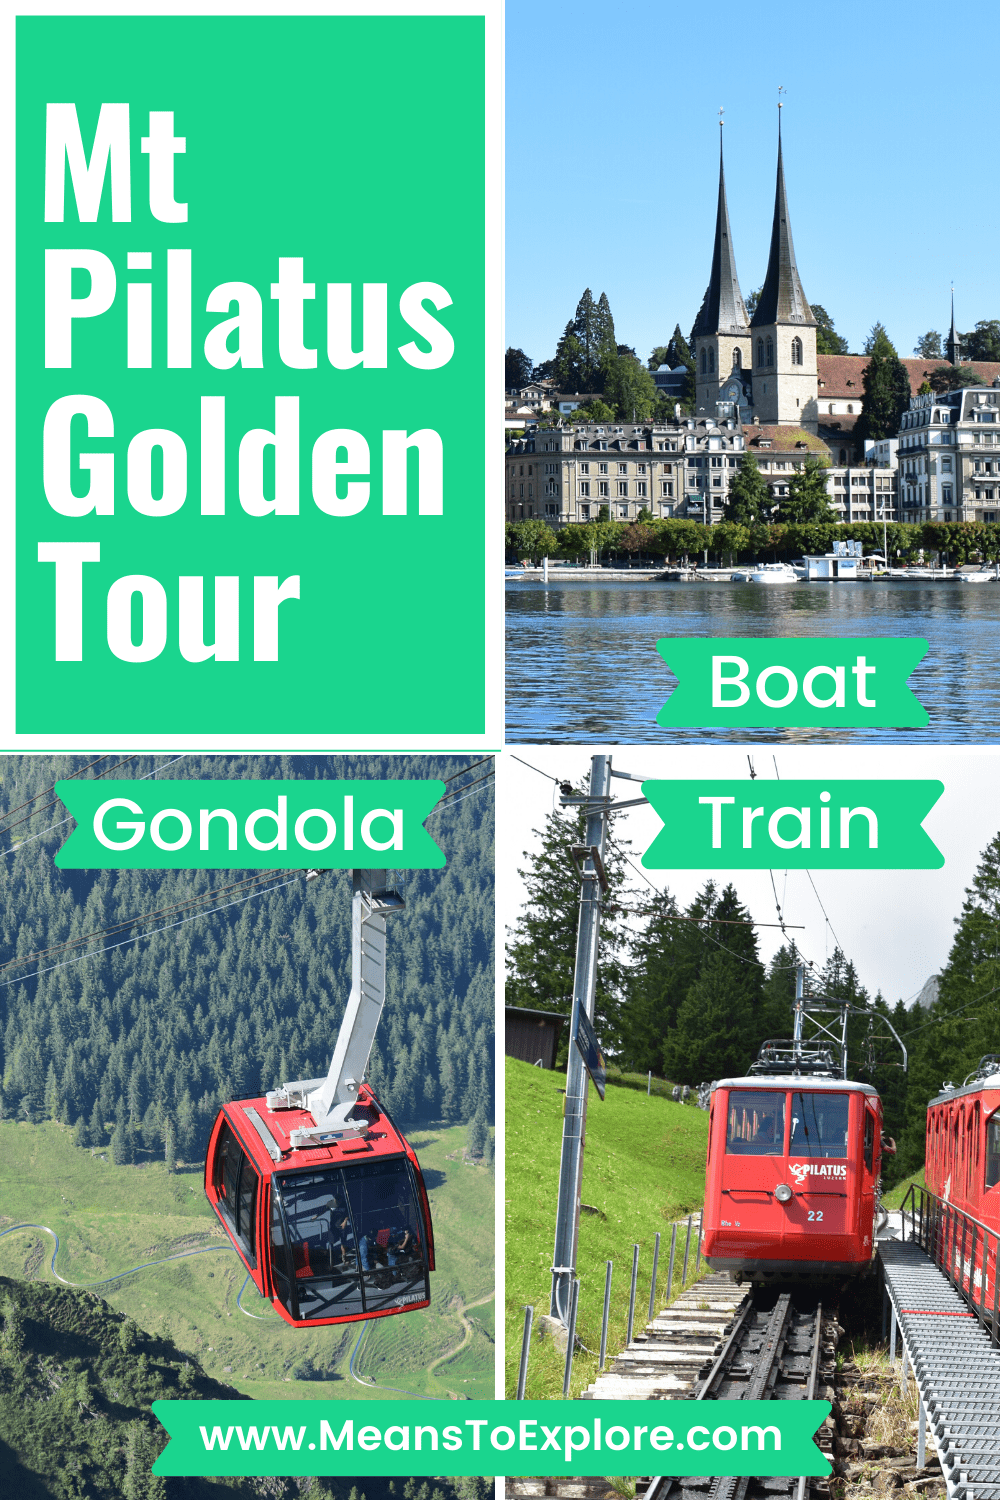 The Ultimate Guide to the Mount Pilatus Golden Tour